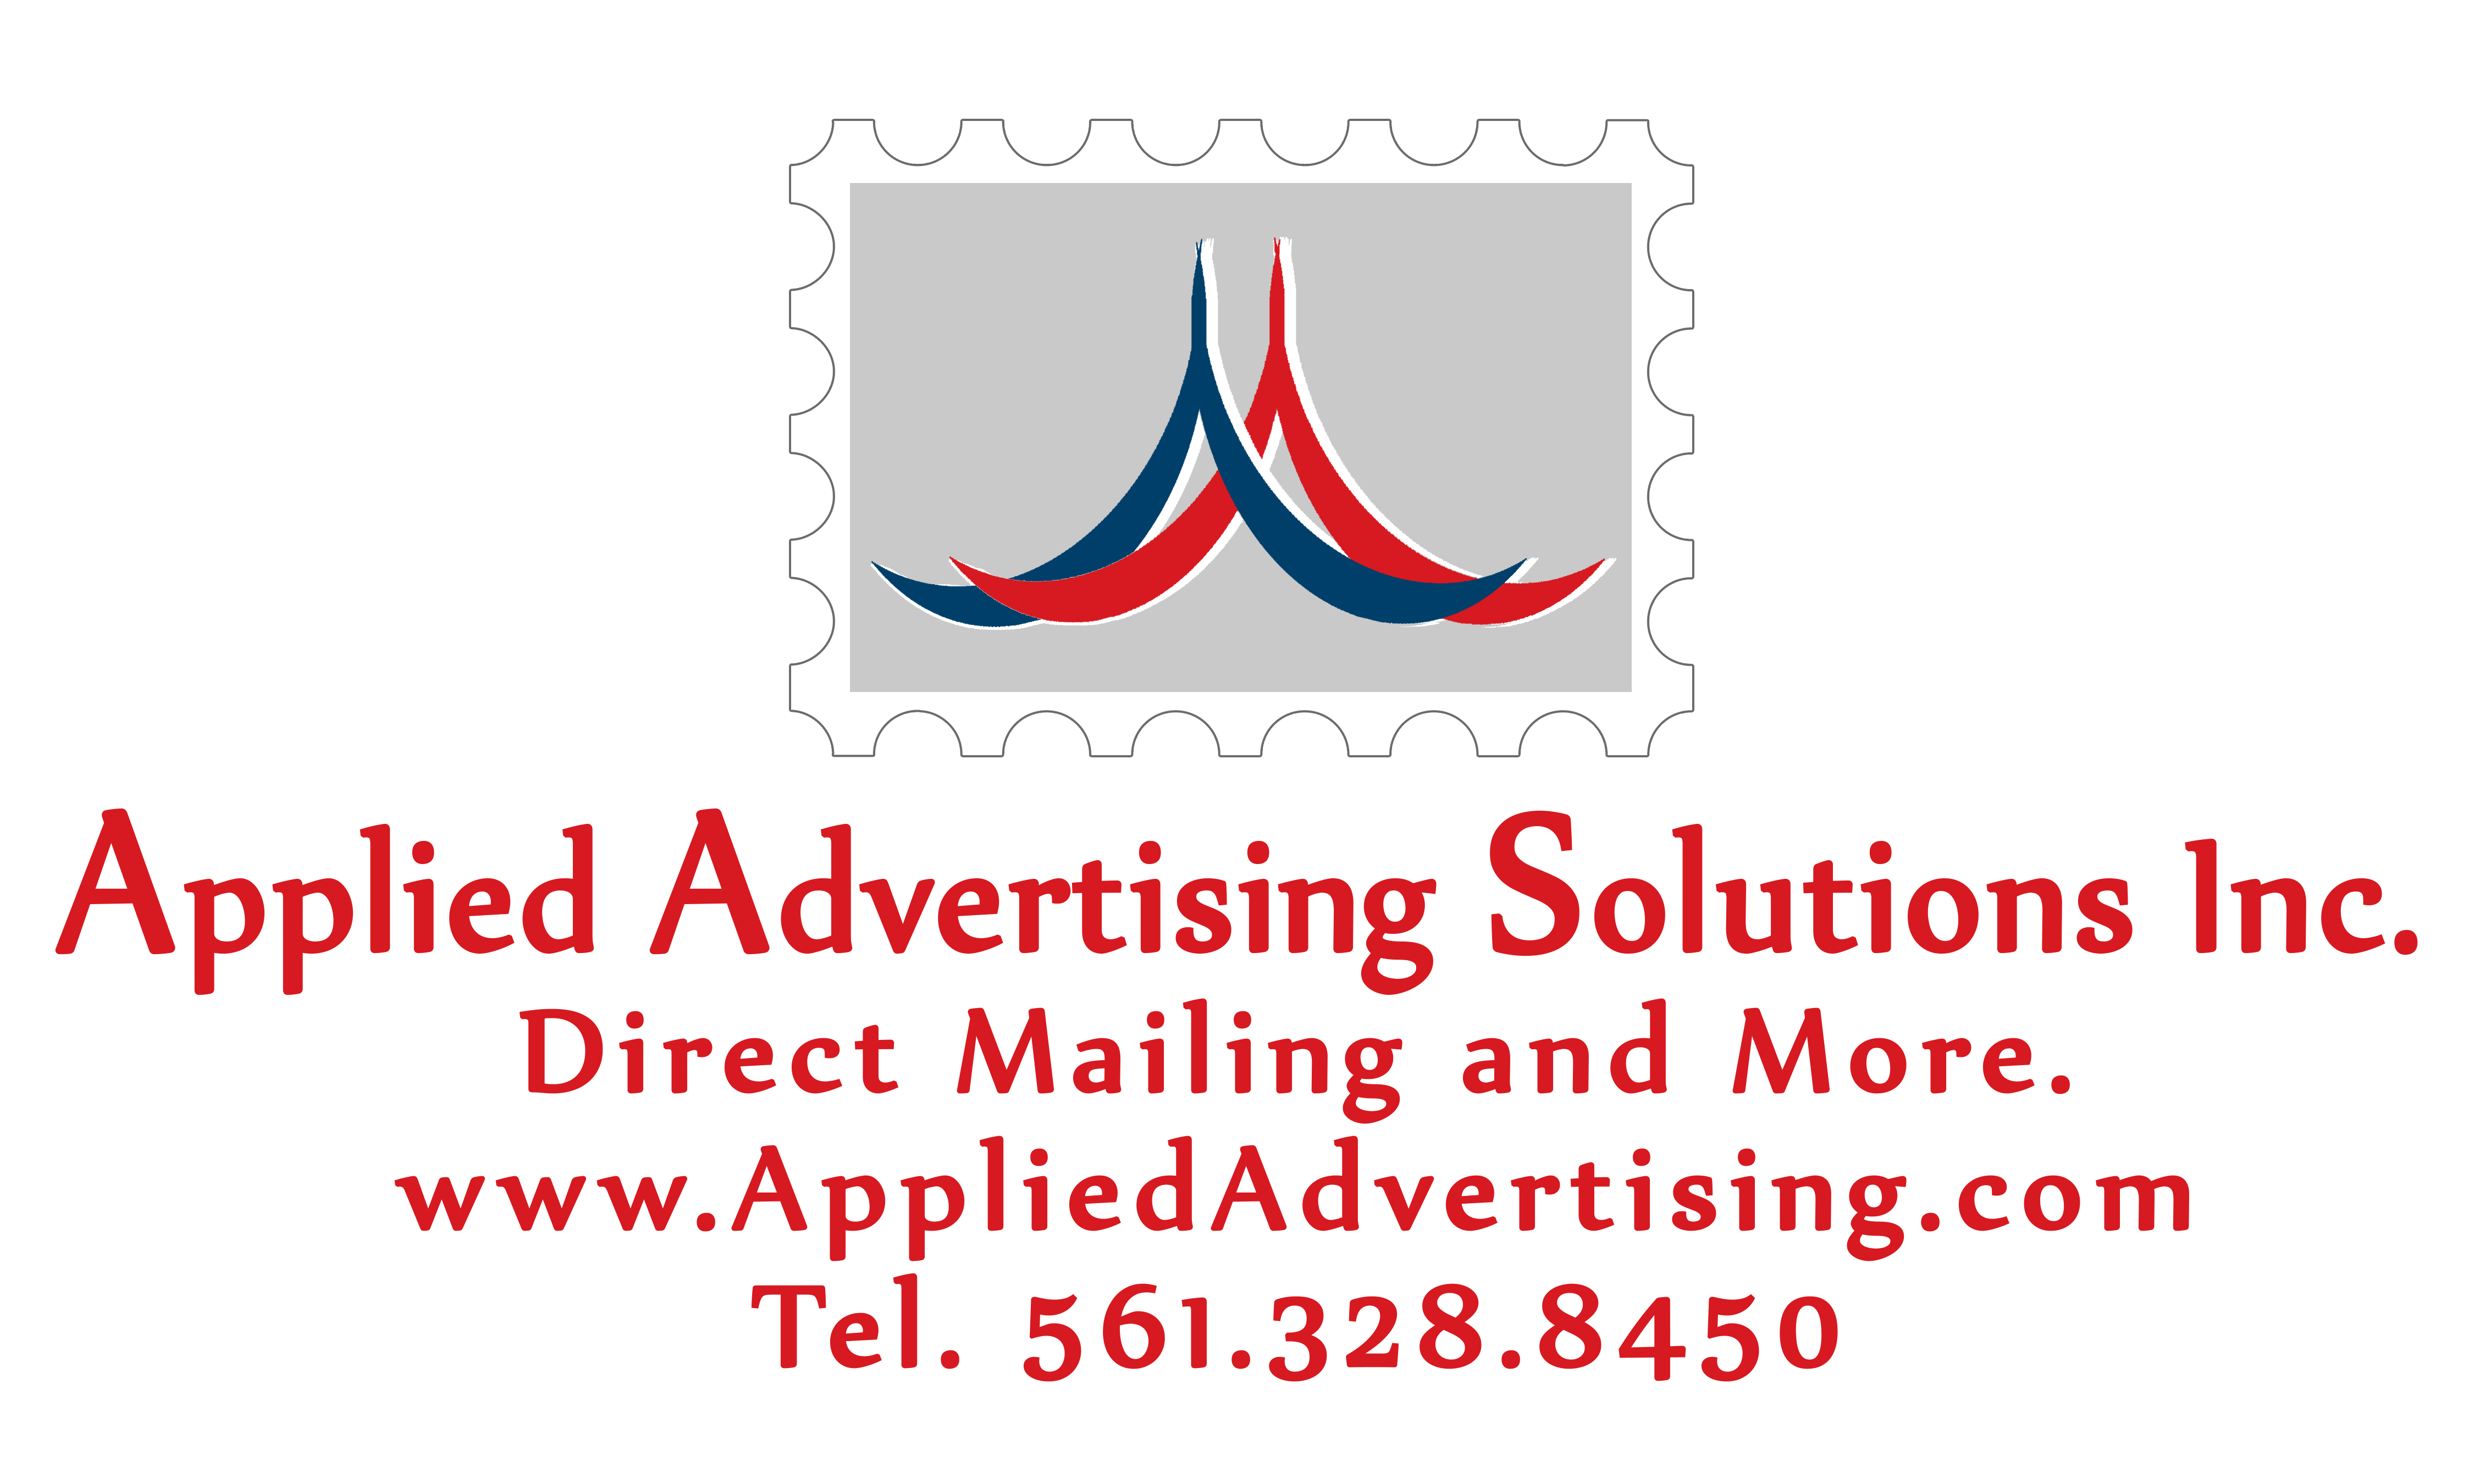 Applied Advertising Solutions Inc